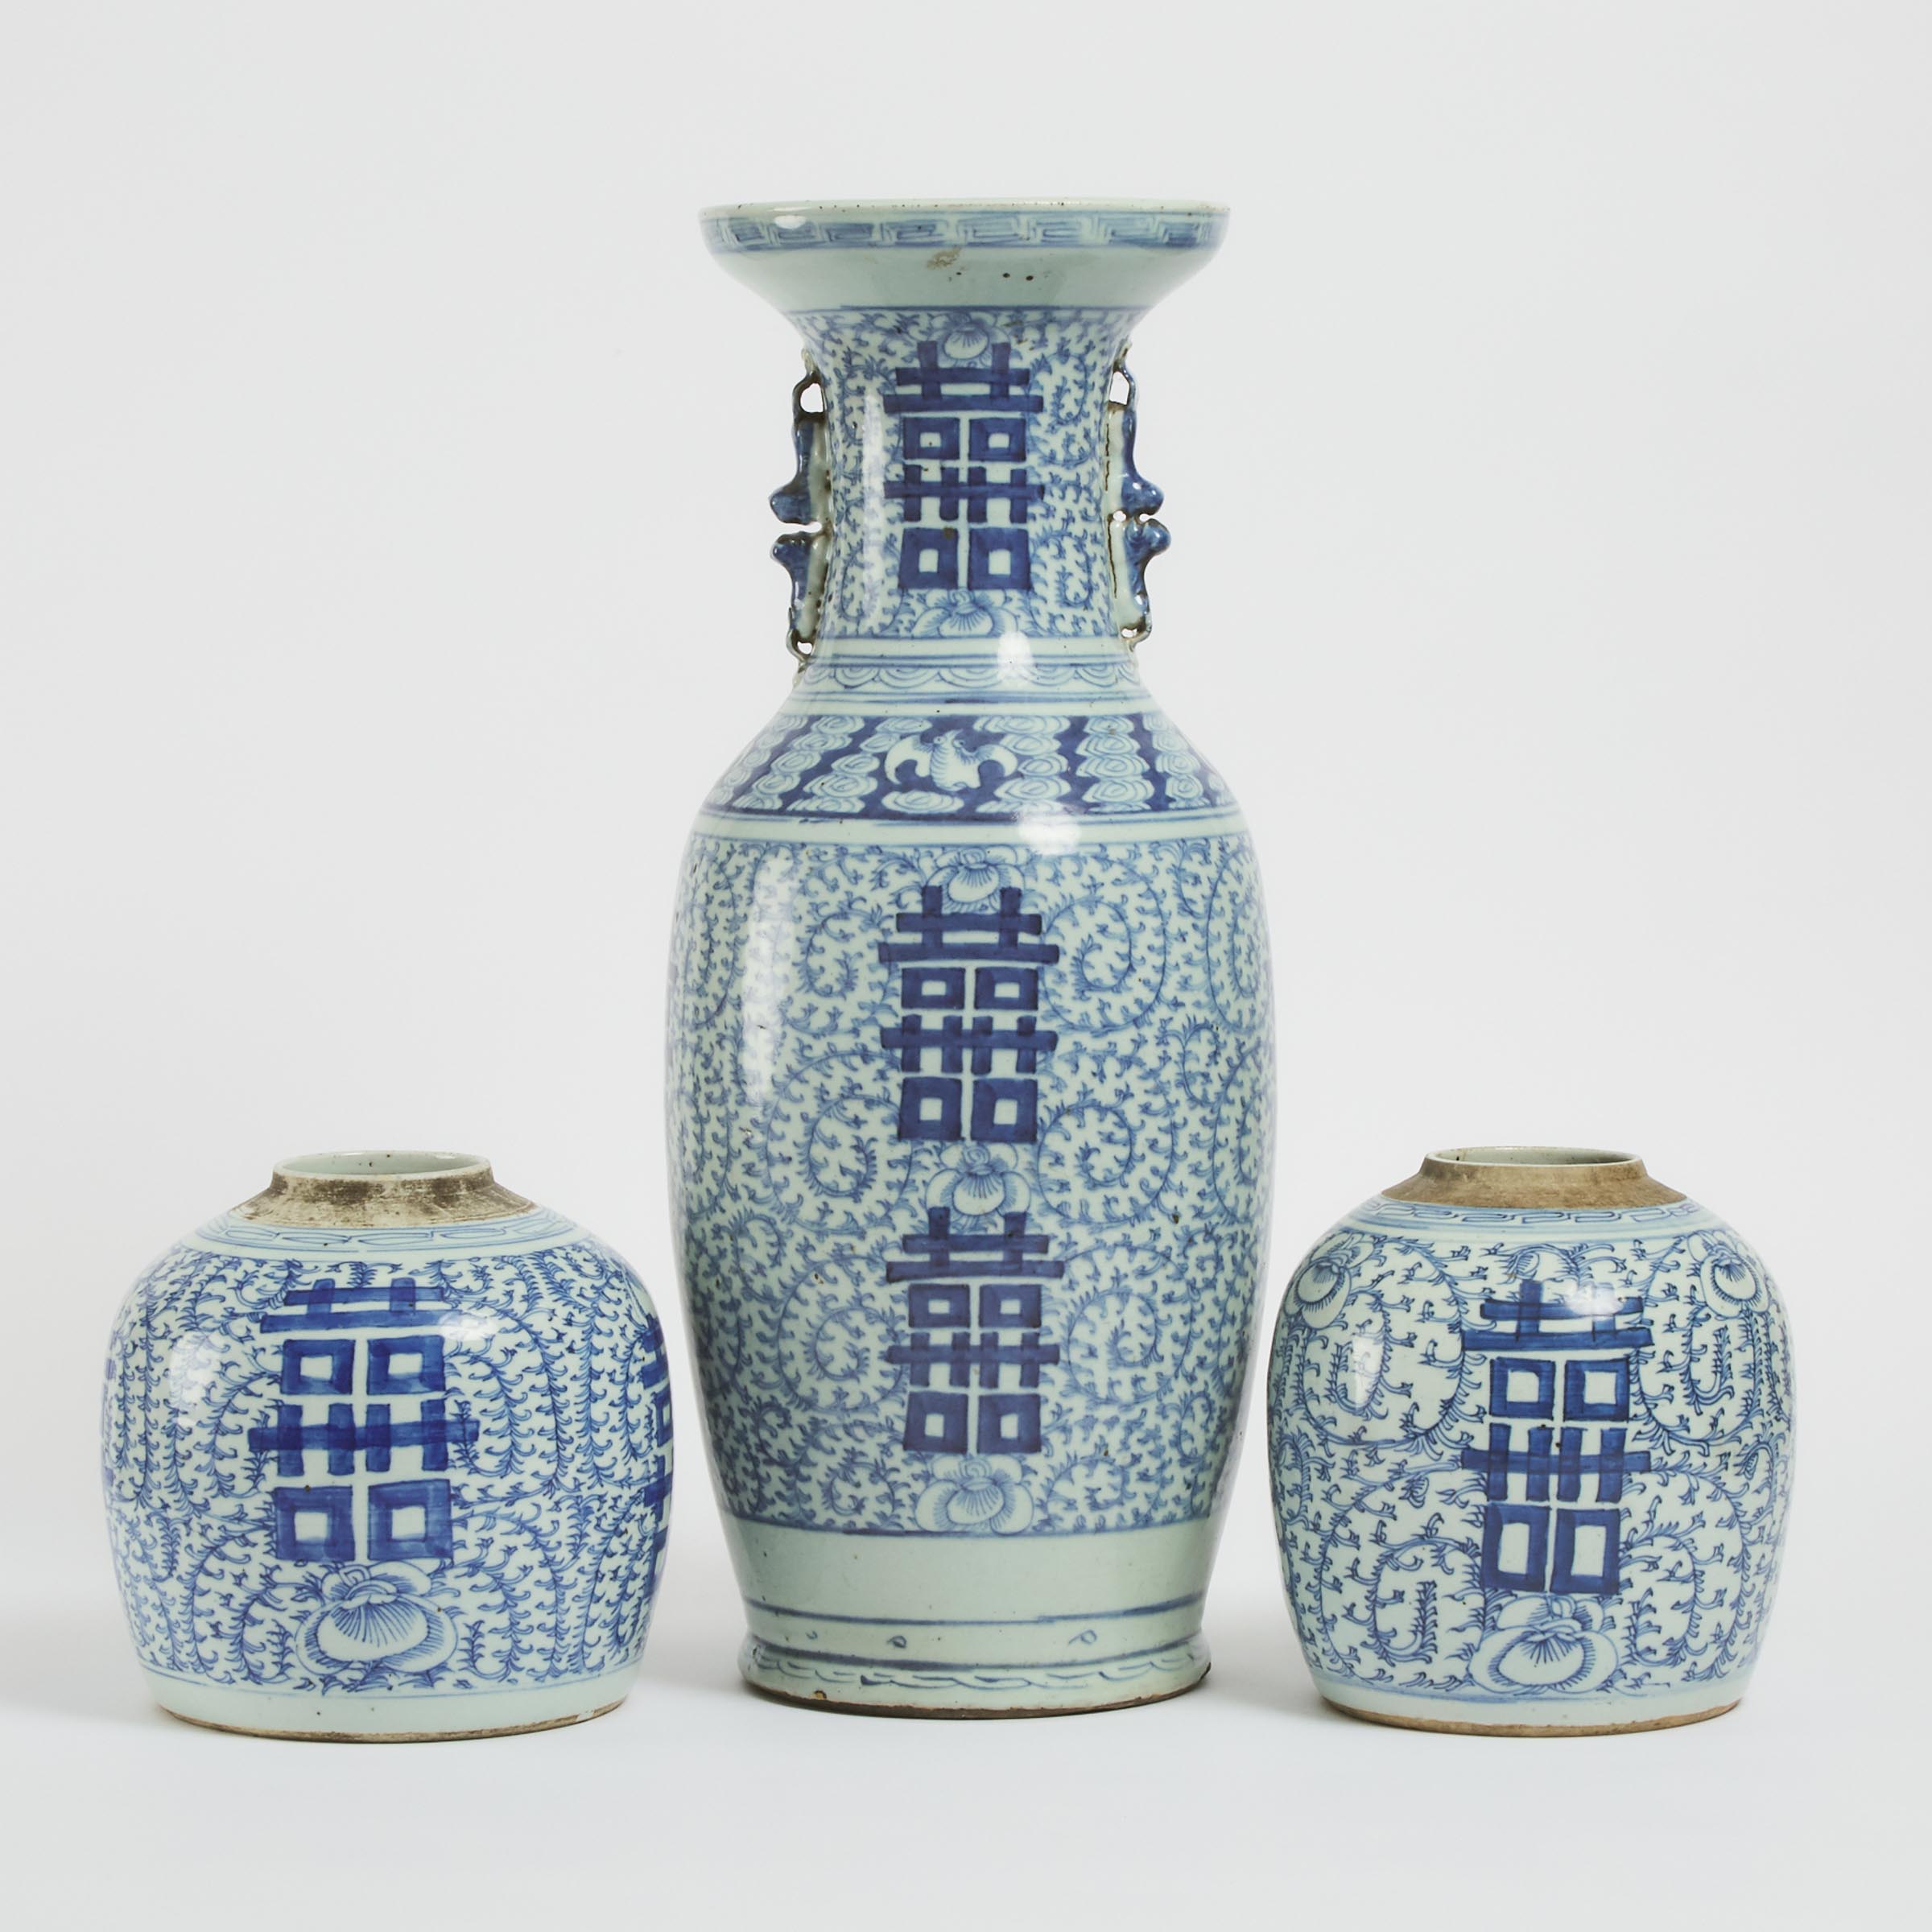 A Large Blue and White 'Double Happiness' Vase, Together With a Pair of Ginger Jars, 19th Century